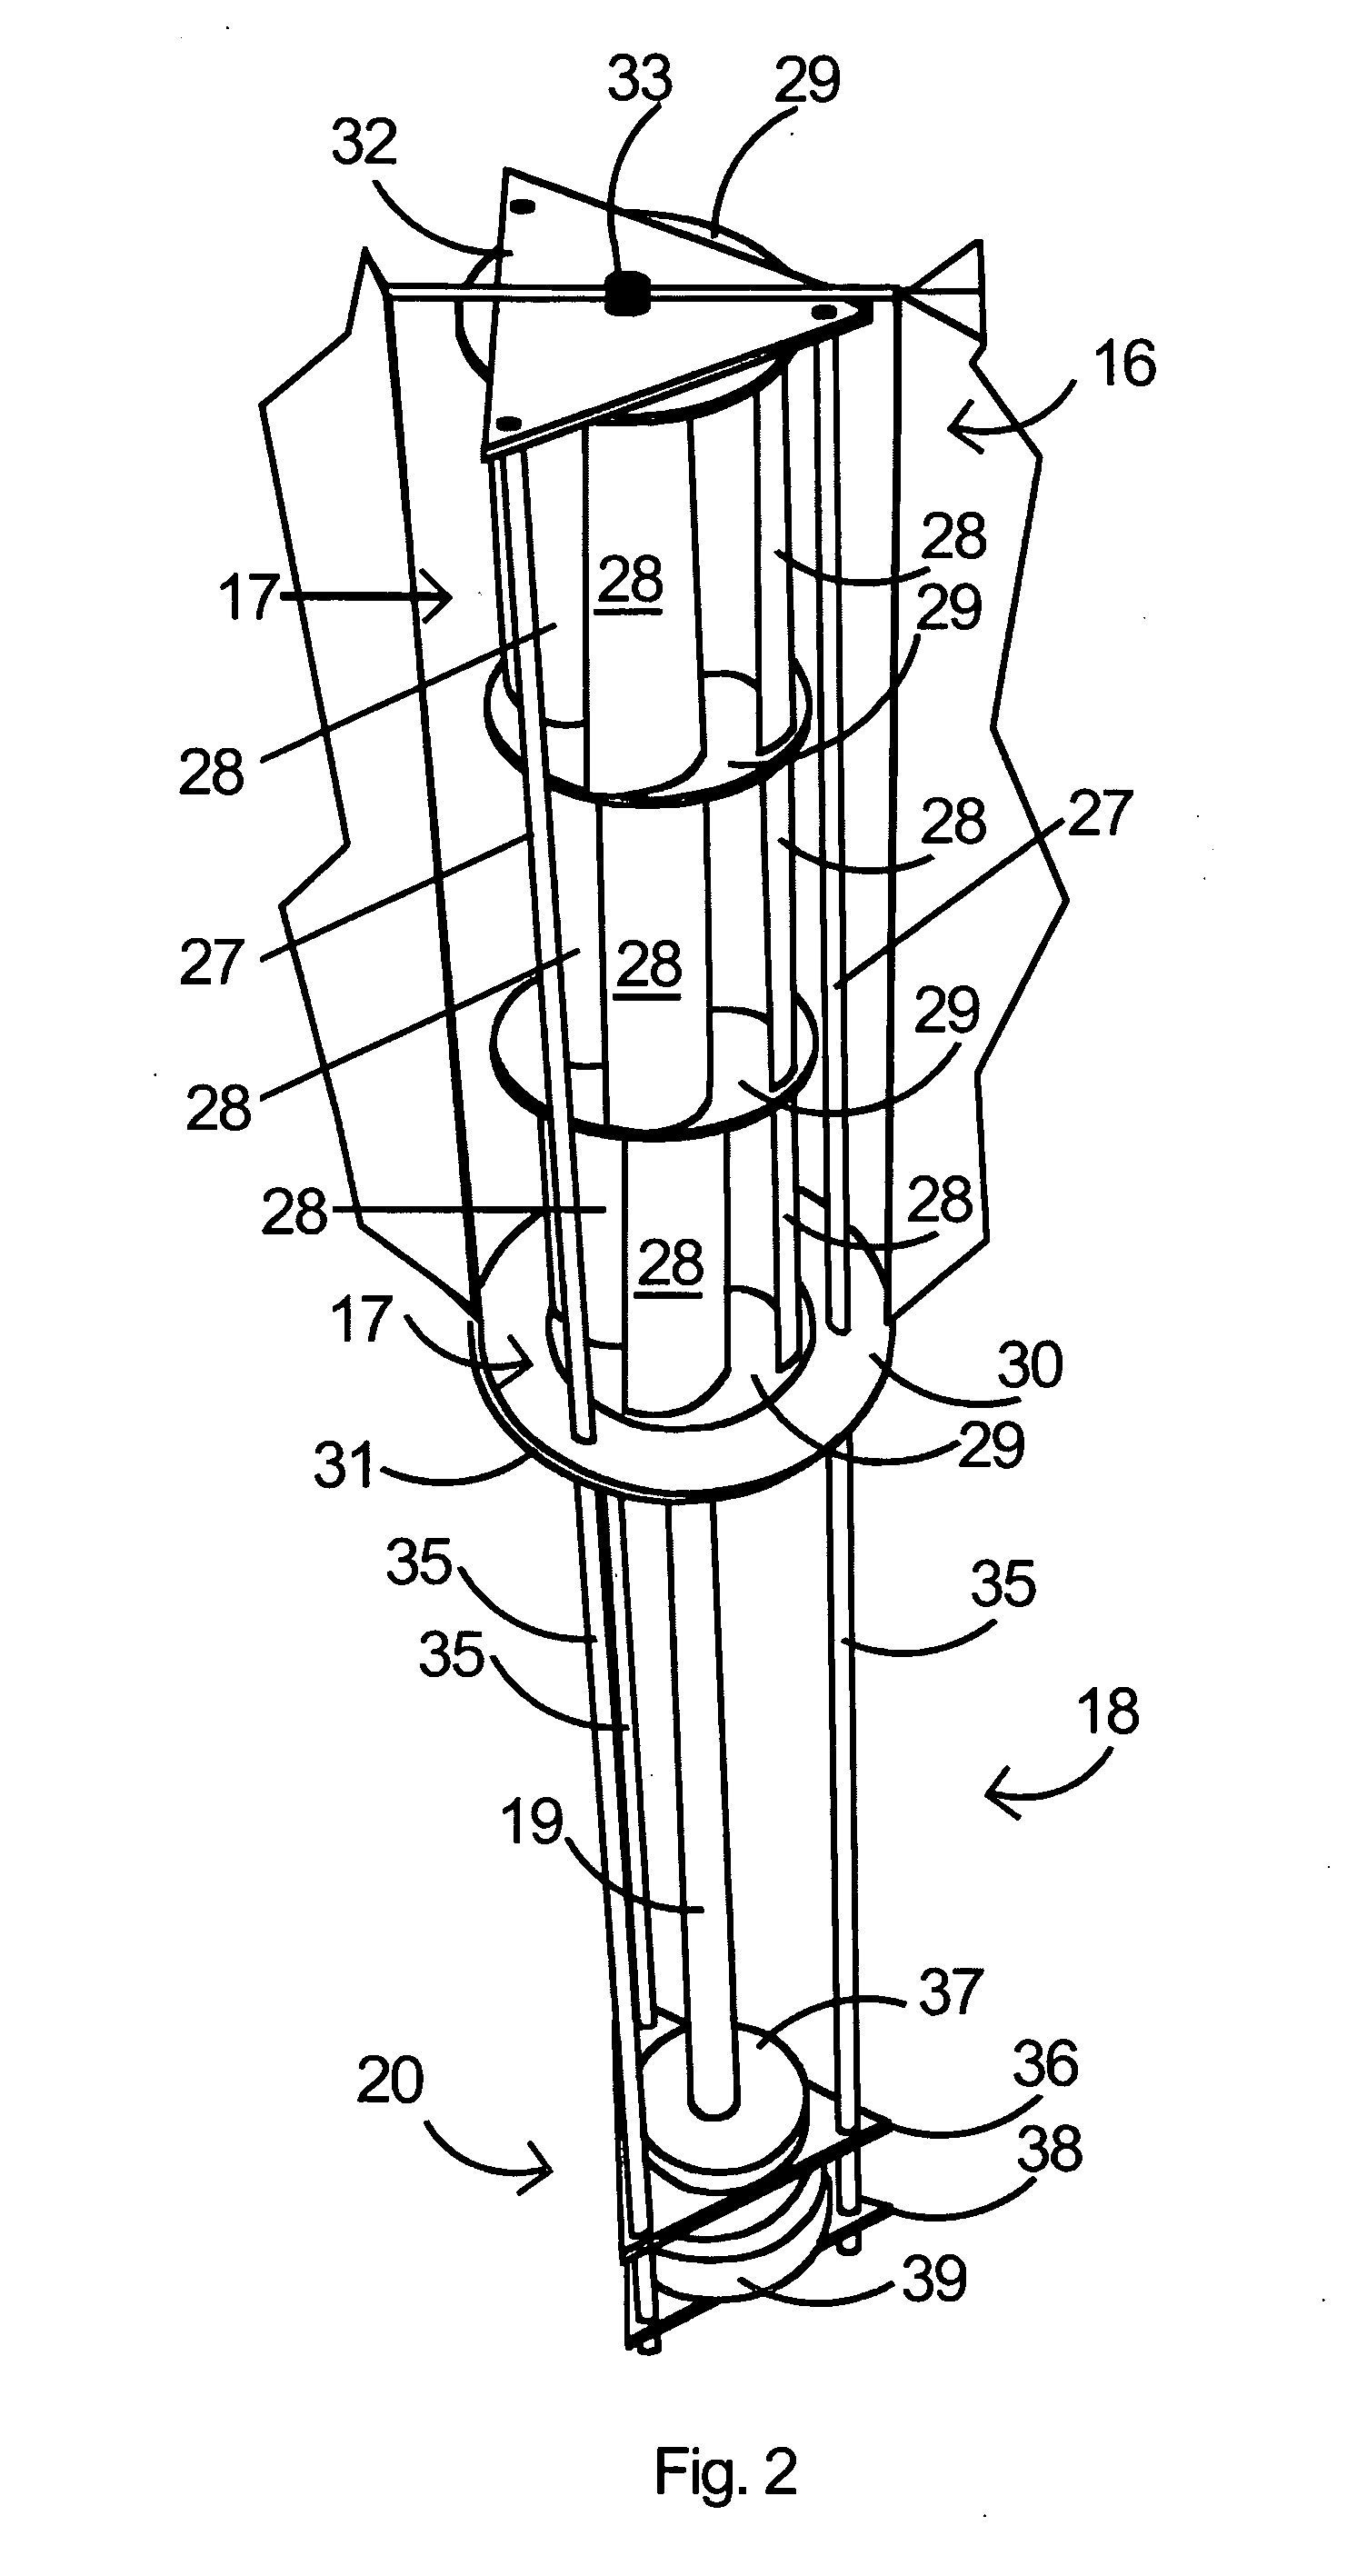 Multi-Axis Wind Turbine With Power Concentrator Sail